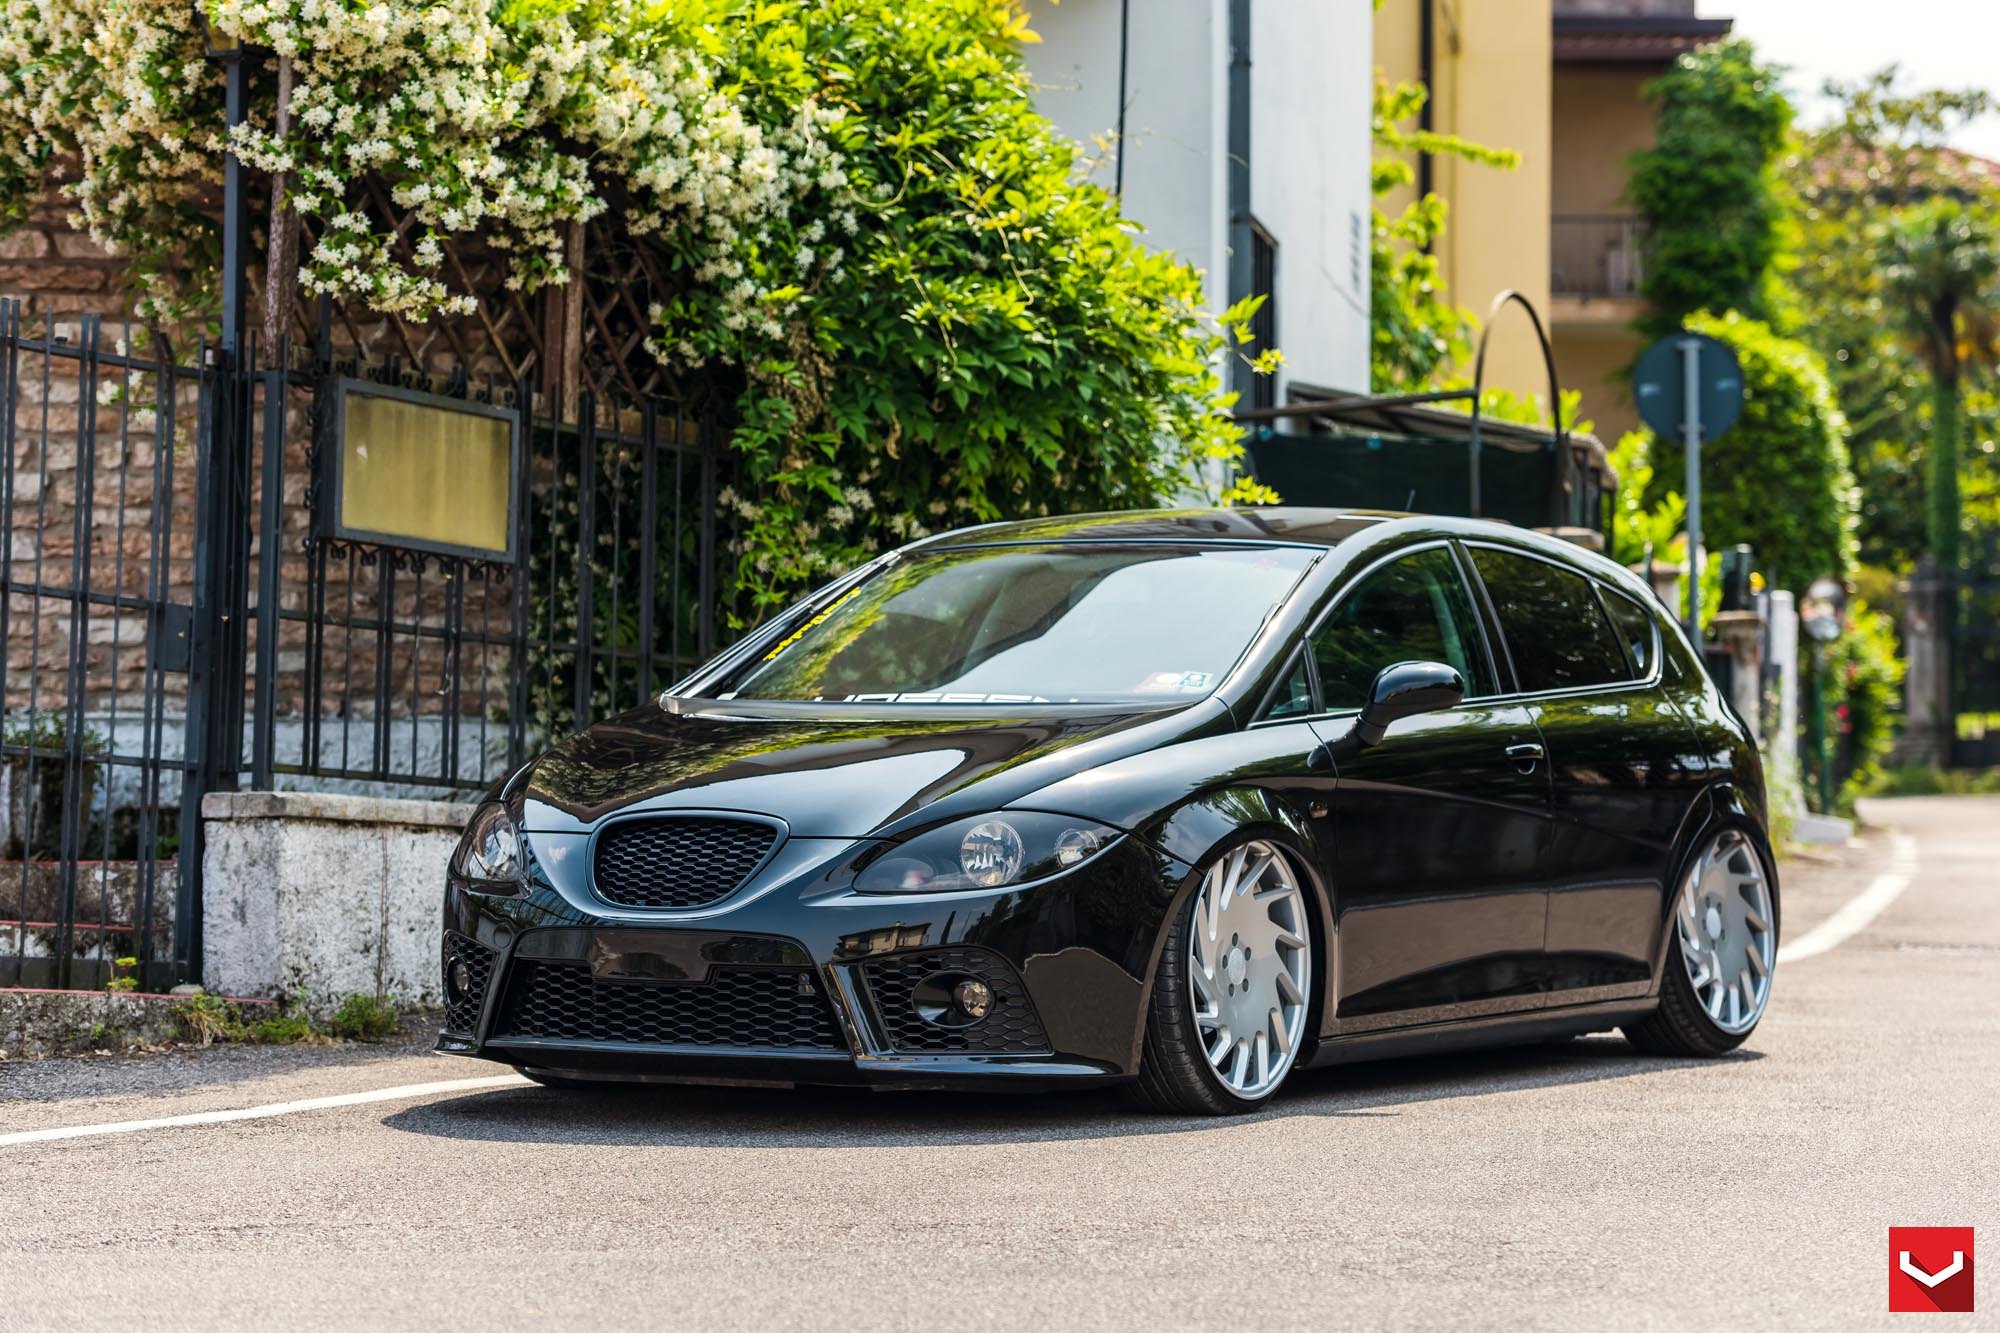 Seat Leon with Blacked Out Grille - Photo by Vossen